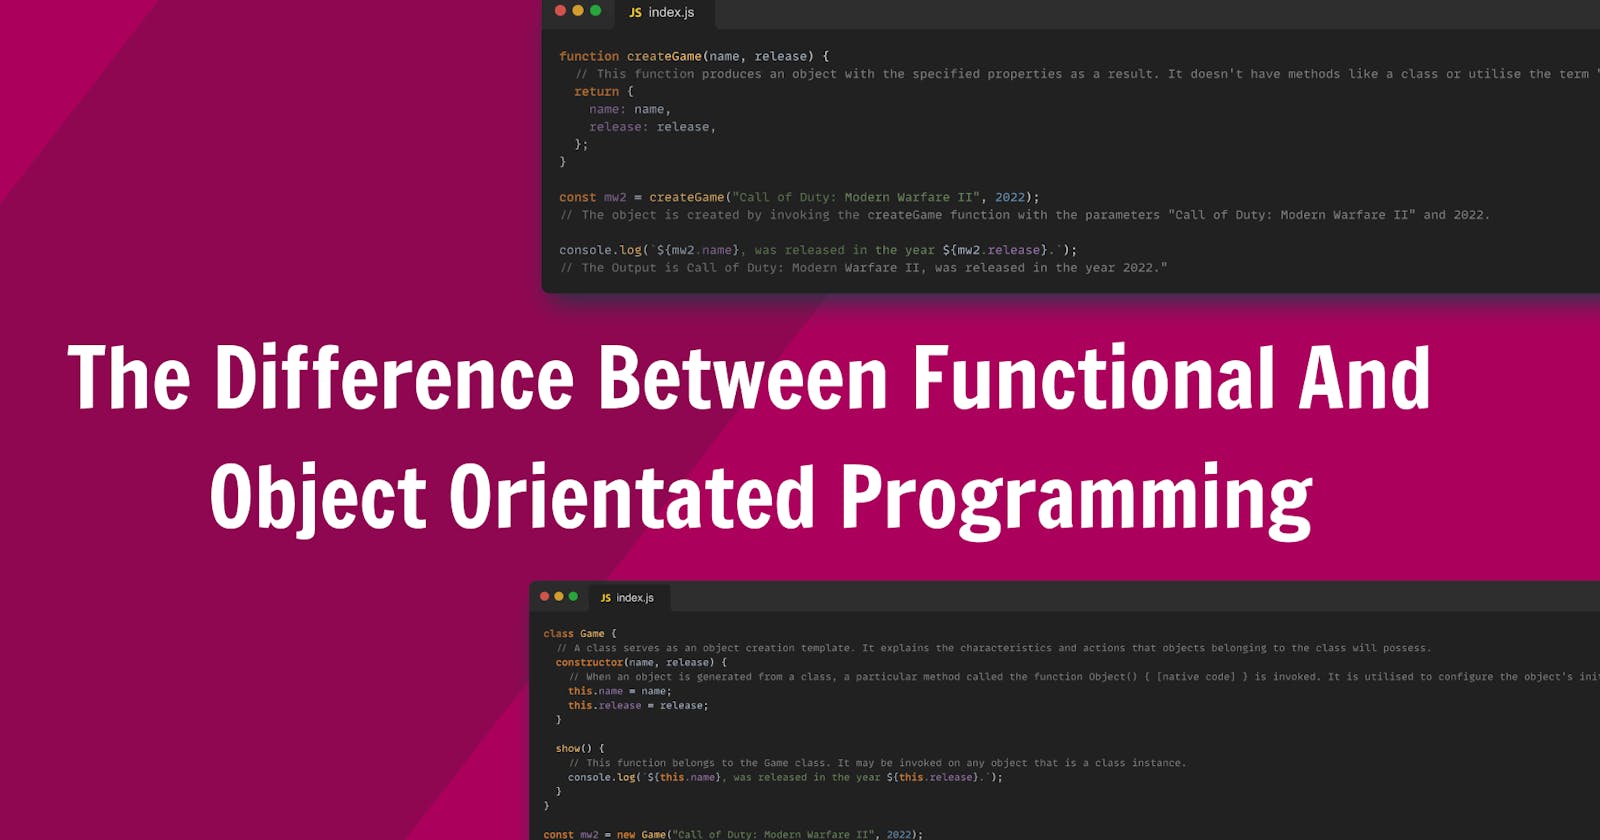 The difference between functional and object orientated programming